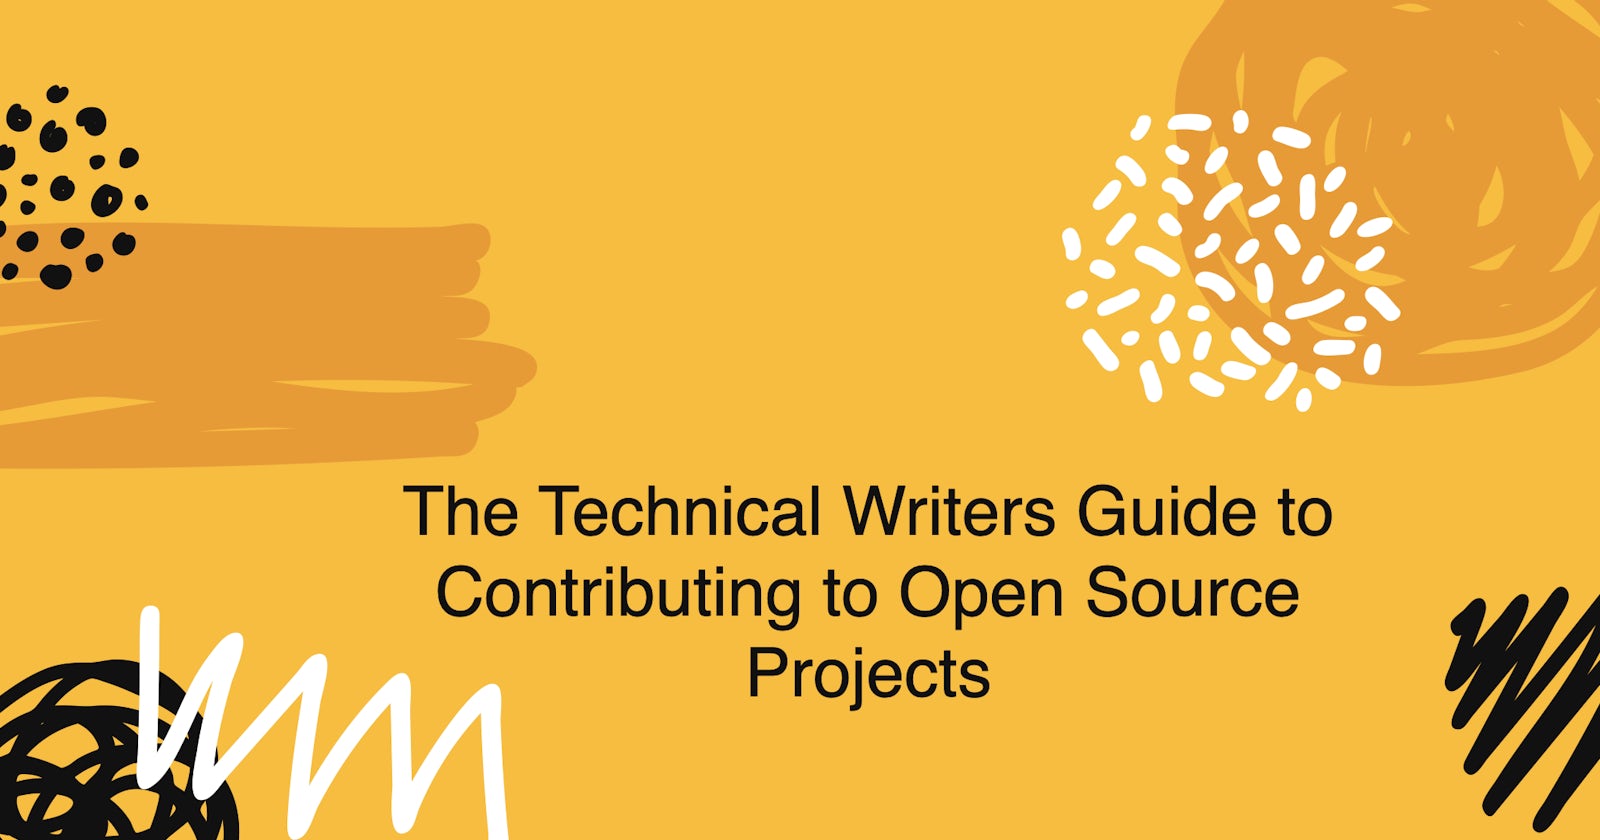 The technical writers guide to contributing to open source projects